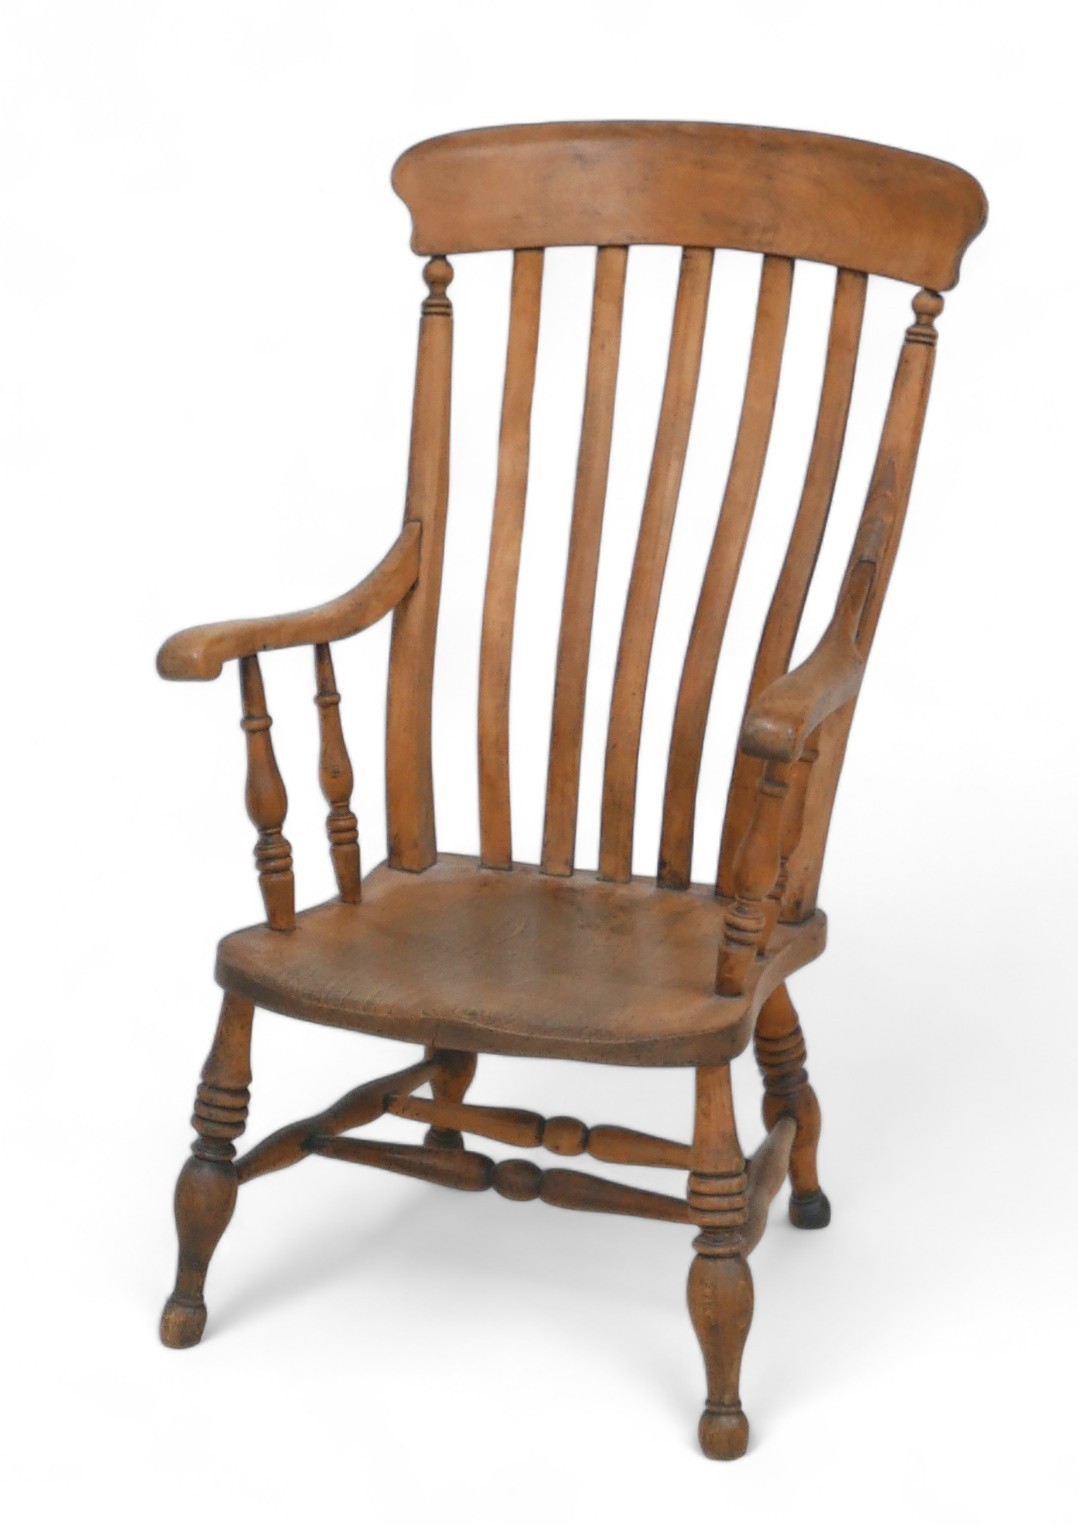 A Victorian ash and elm slat back grandfather chair, with maker's mark initials 'BR' stamped to